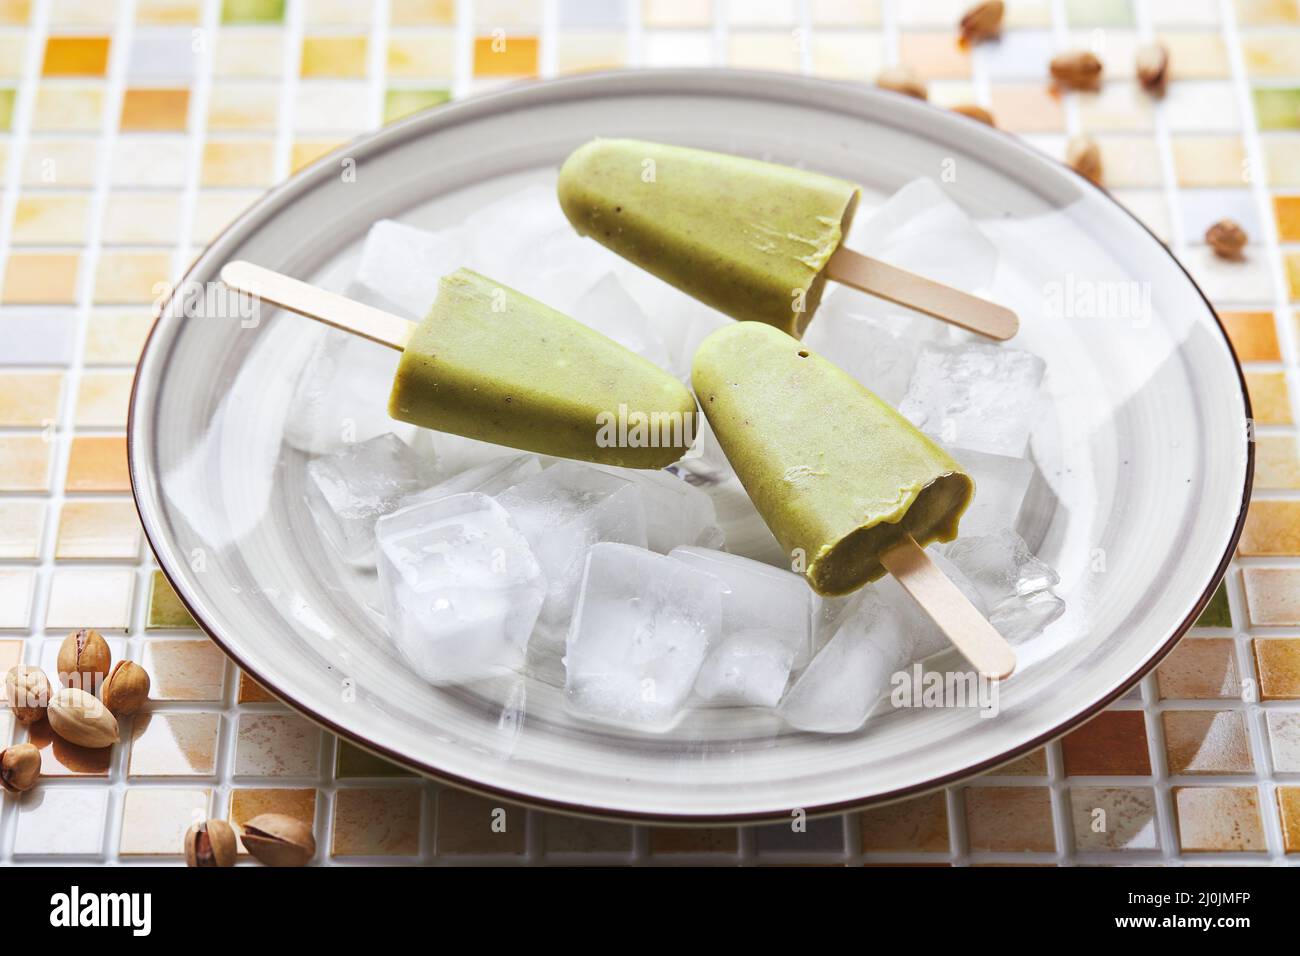 Frozen homemade pistachio popsicle in bowl of ice on mosaic tile table. Refreshing popsicle, frozen green juice on stick. Top vi Stock Photo